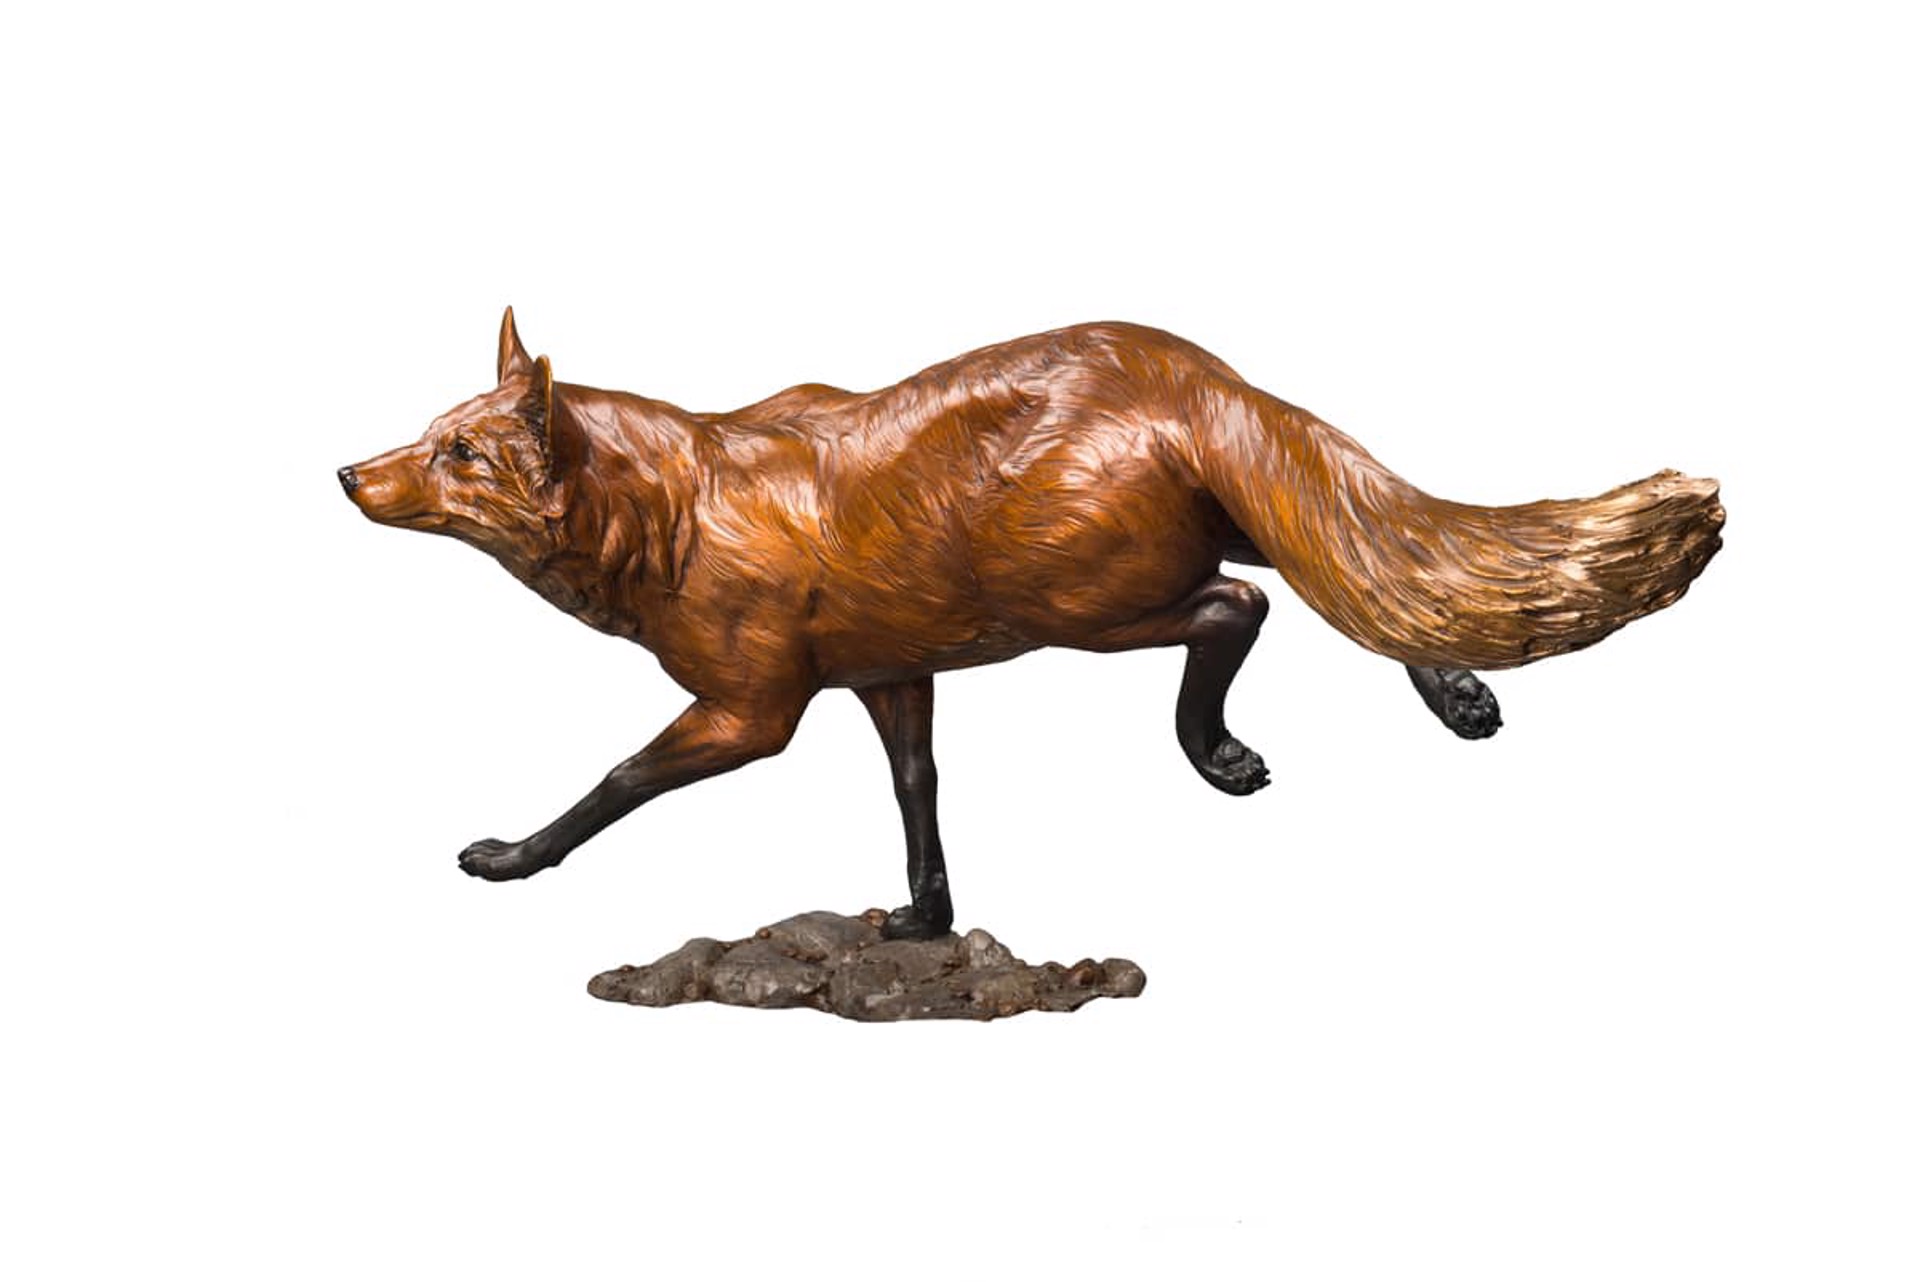 Running Fox Original Bronze Sculpture by Rip and Alison Caswell, Contemporary Fine Art, Modern Wildlife Art, Available At Gallery Wild